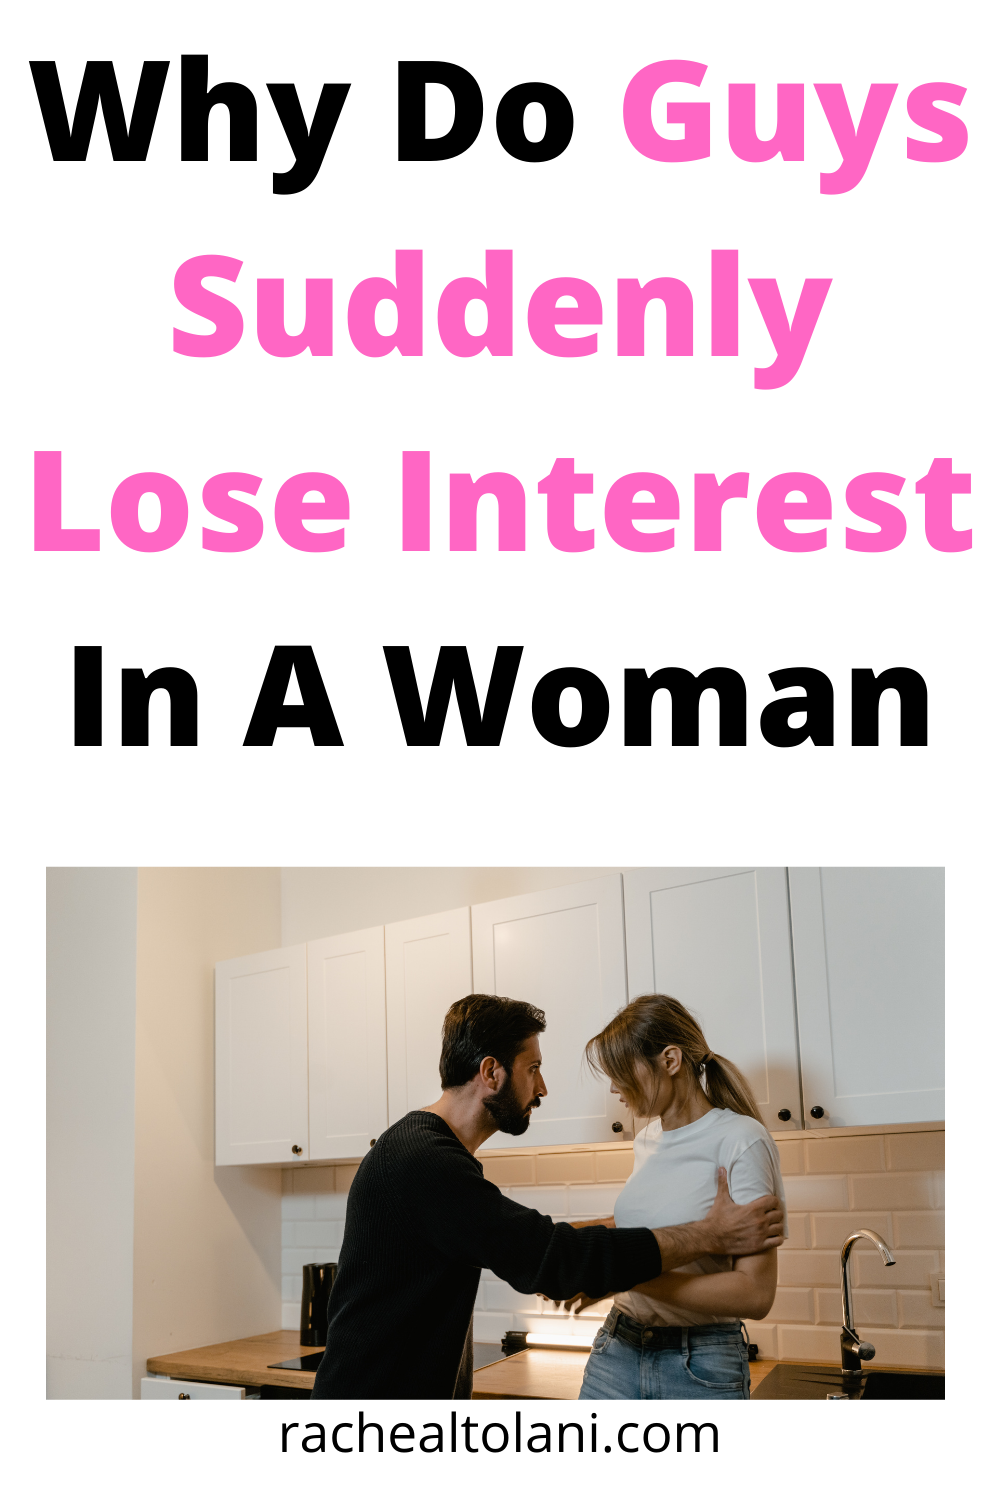 Why Guys Suddenly Lose Interest In A Woman - pic